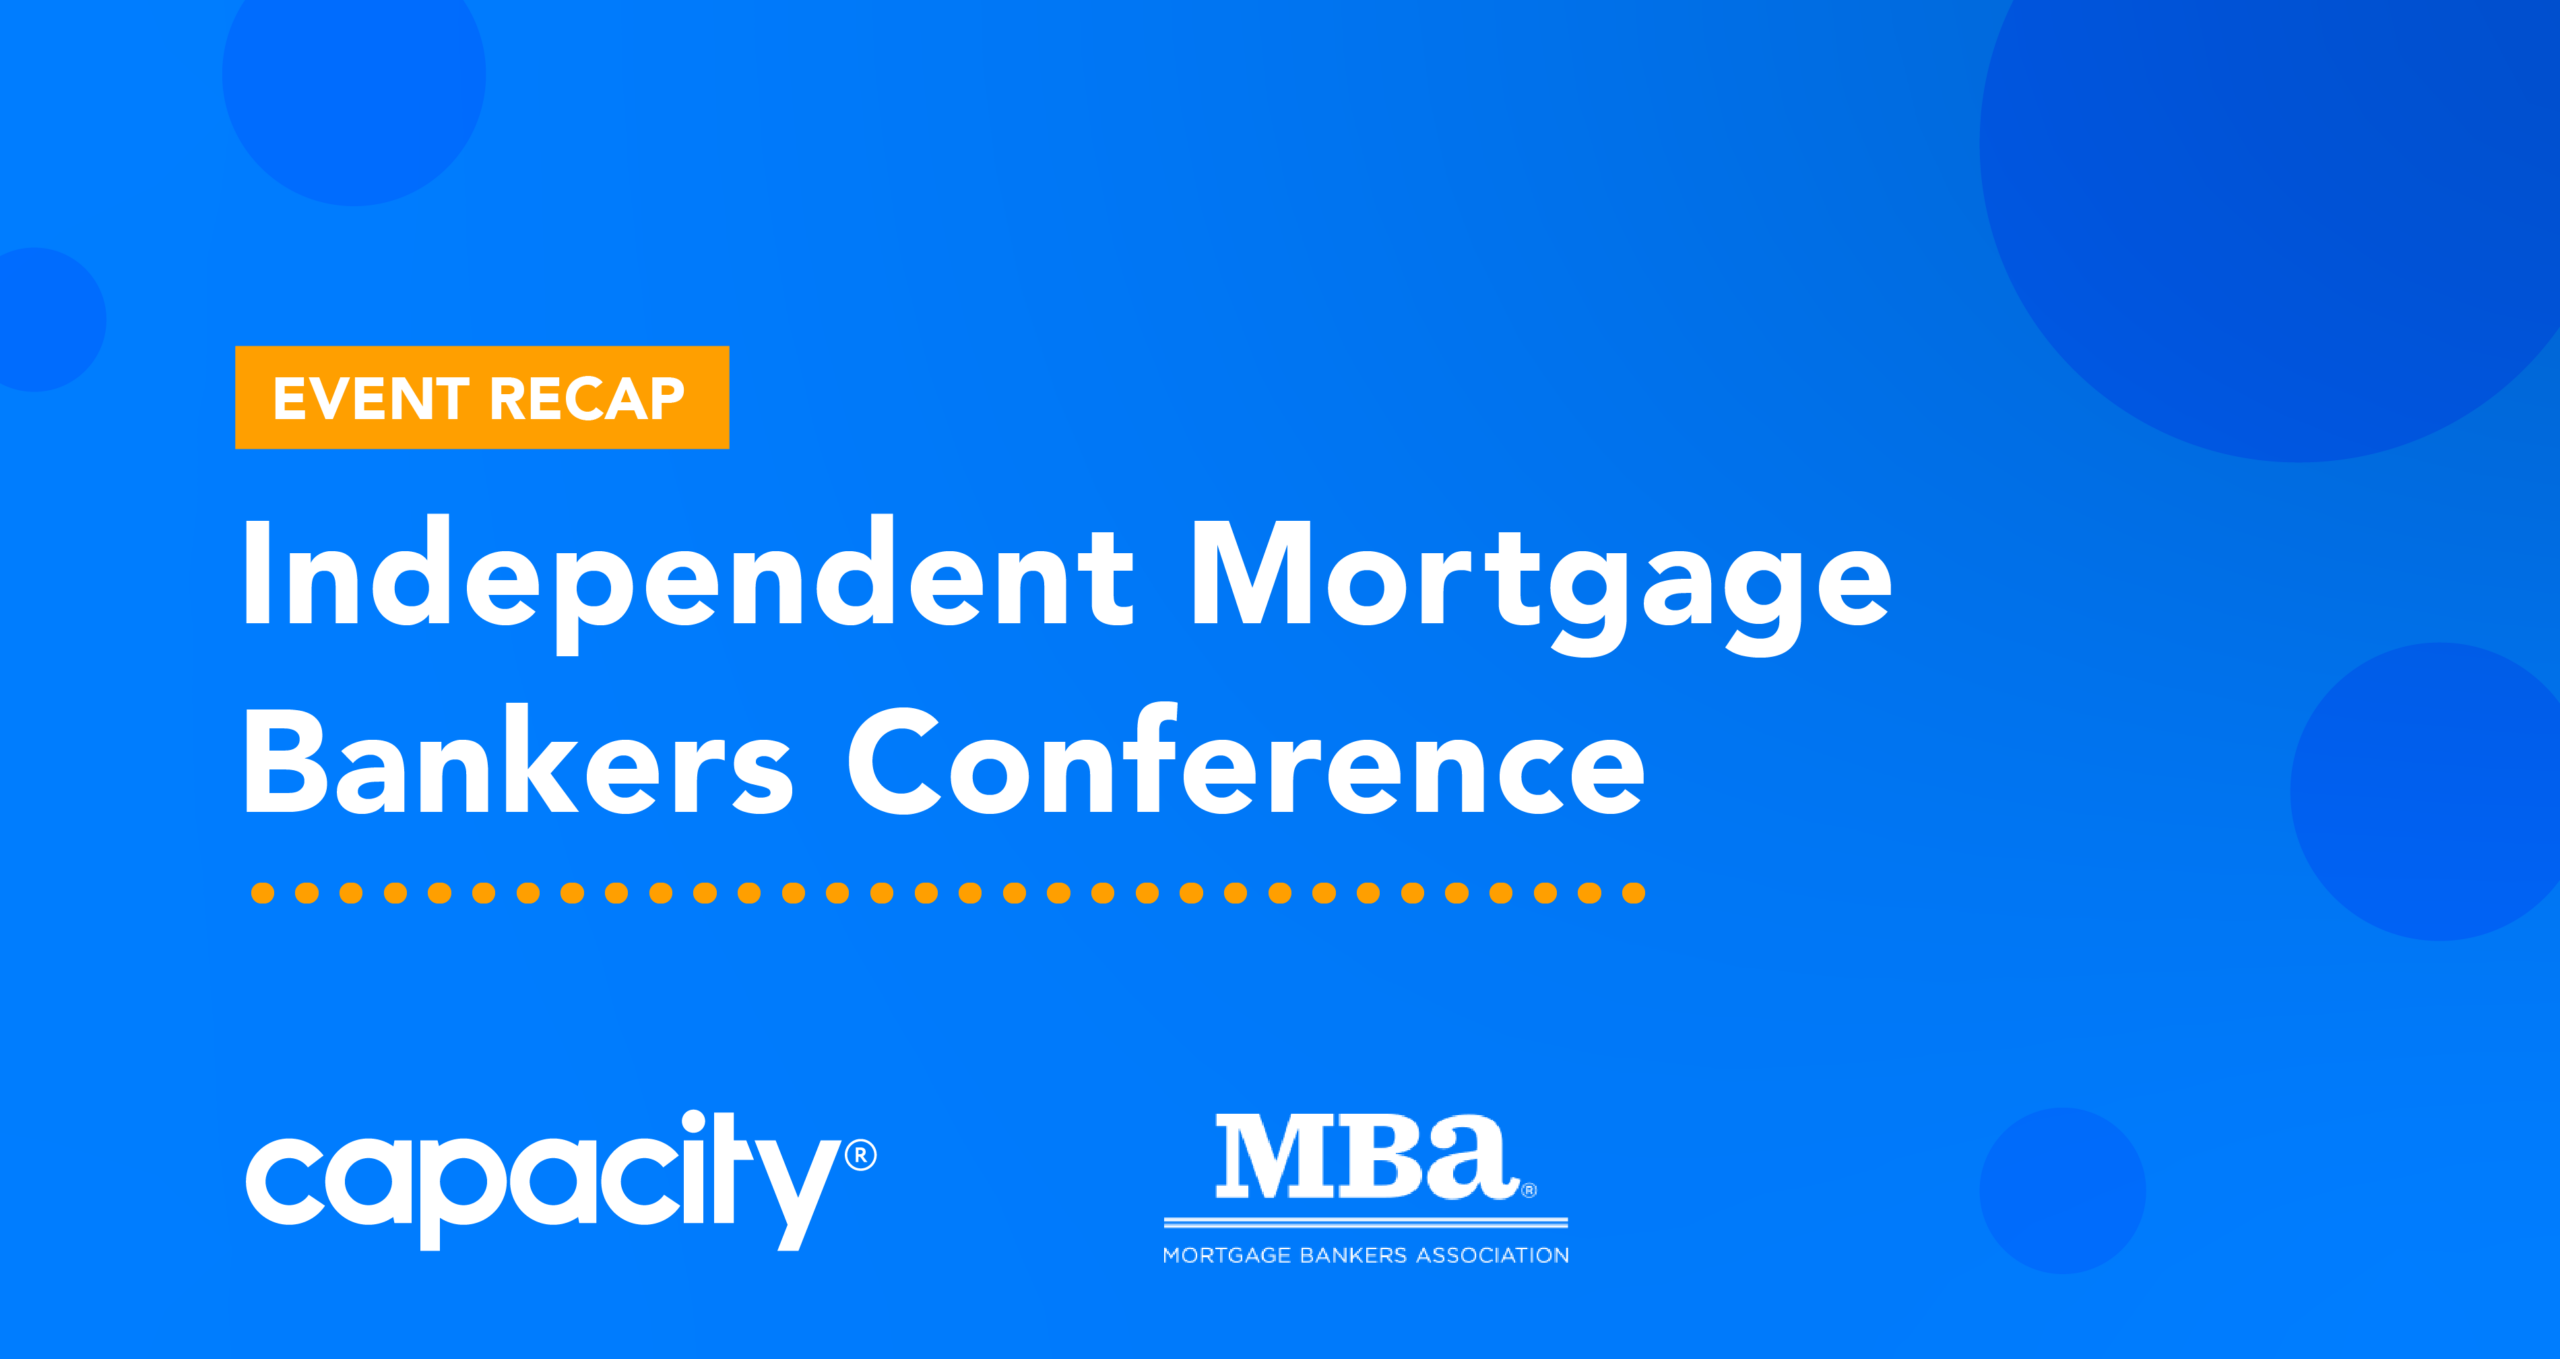 MBA’s Independent Mortgage Bankers Conference 2022 Recap